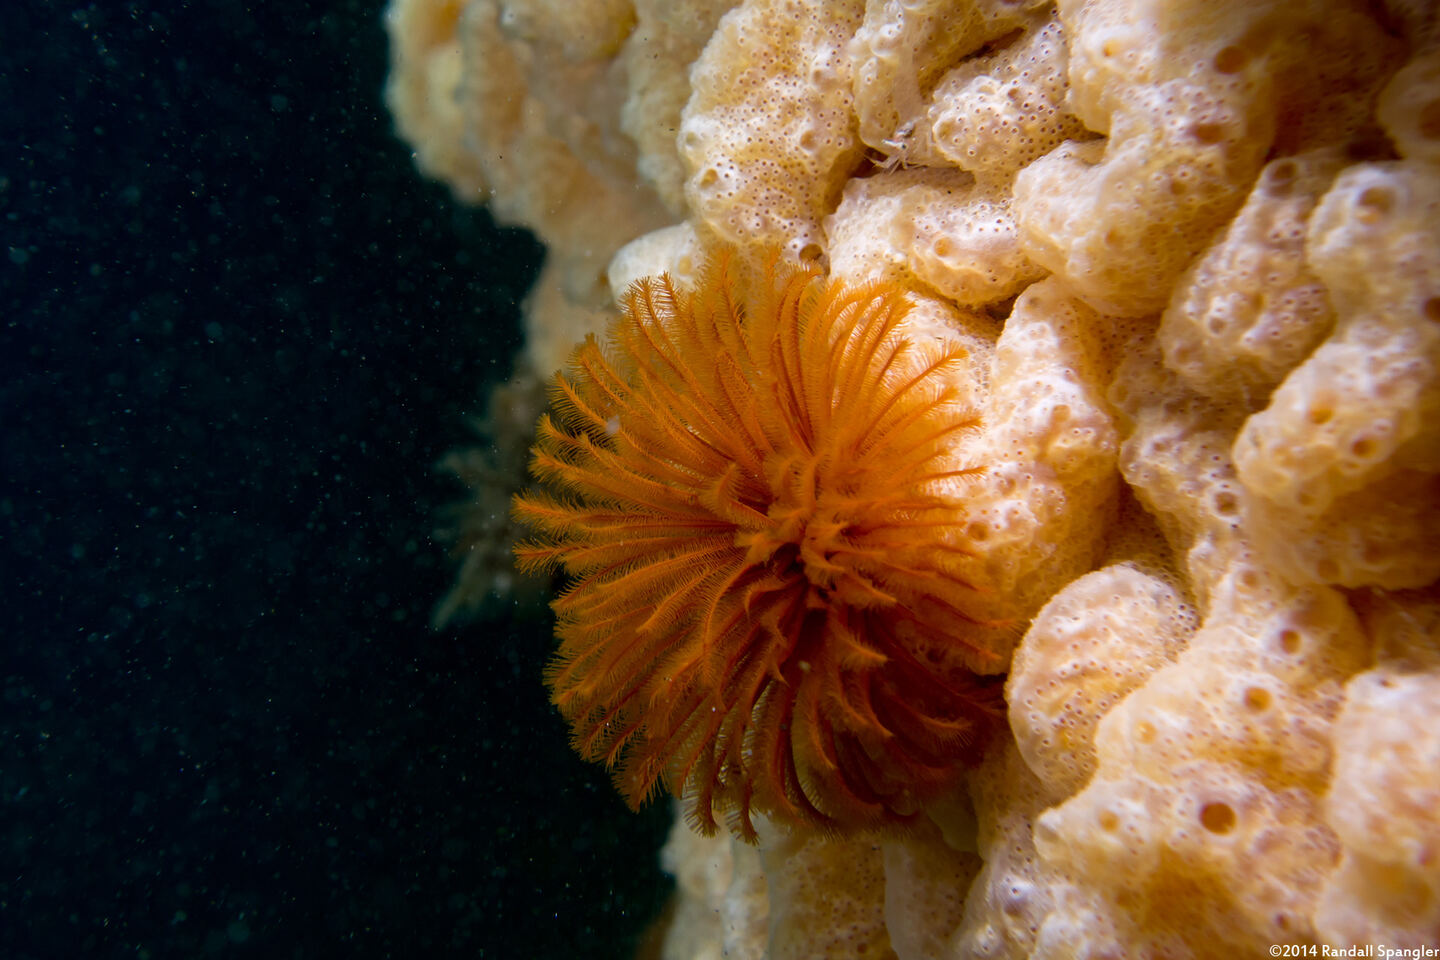 Heptacarpus sitchensis (Sitka Shrimp); Top center, above the feather duster worm